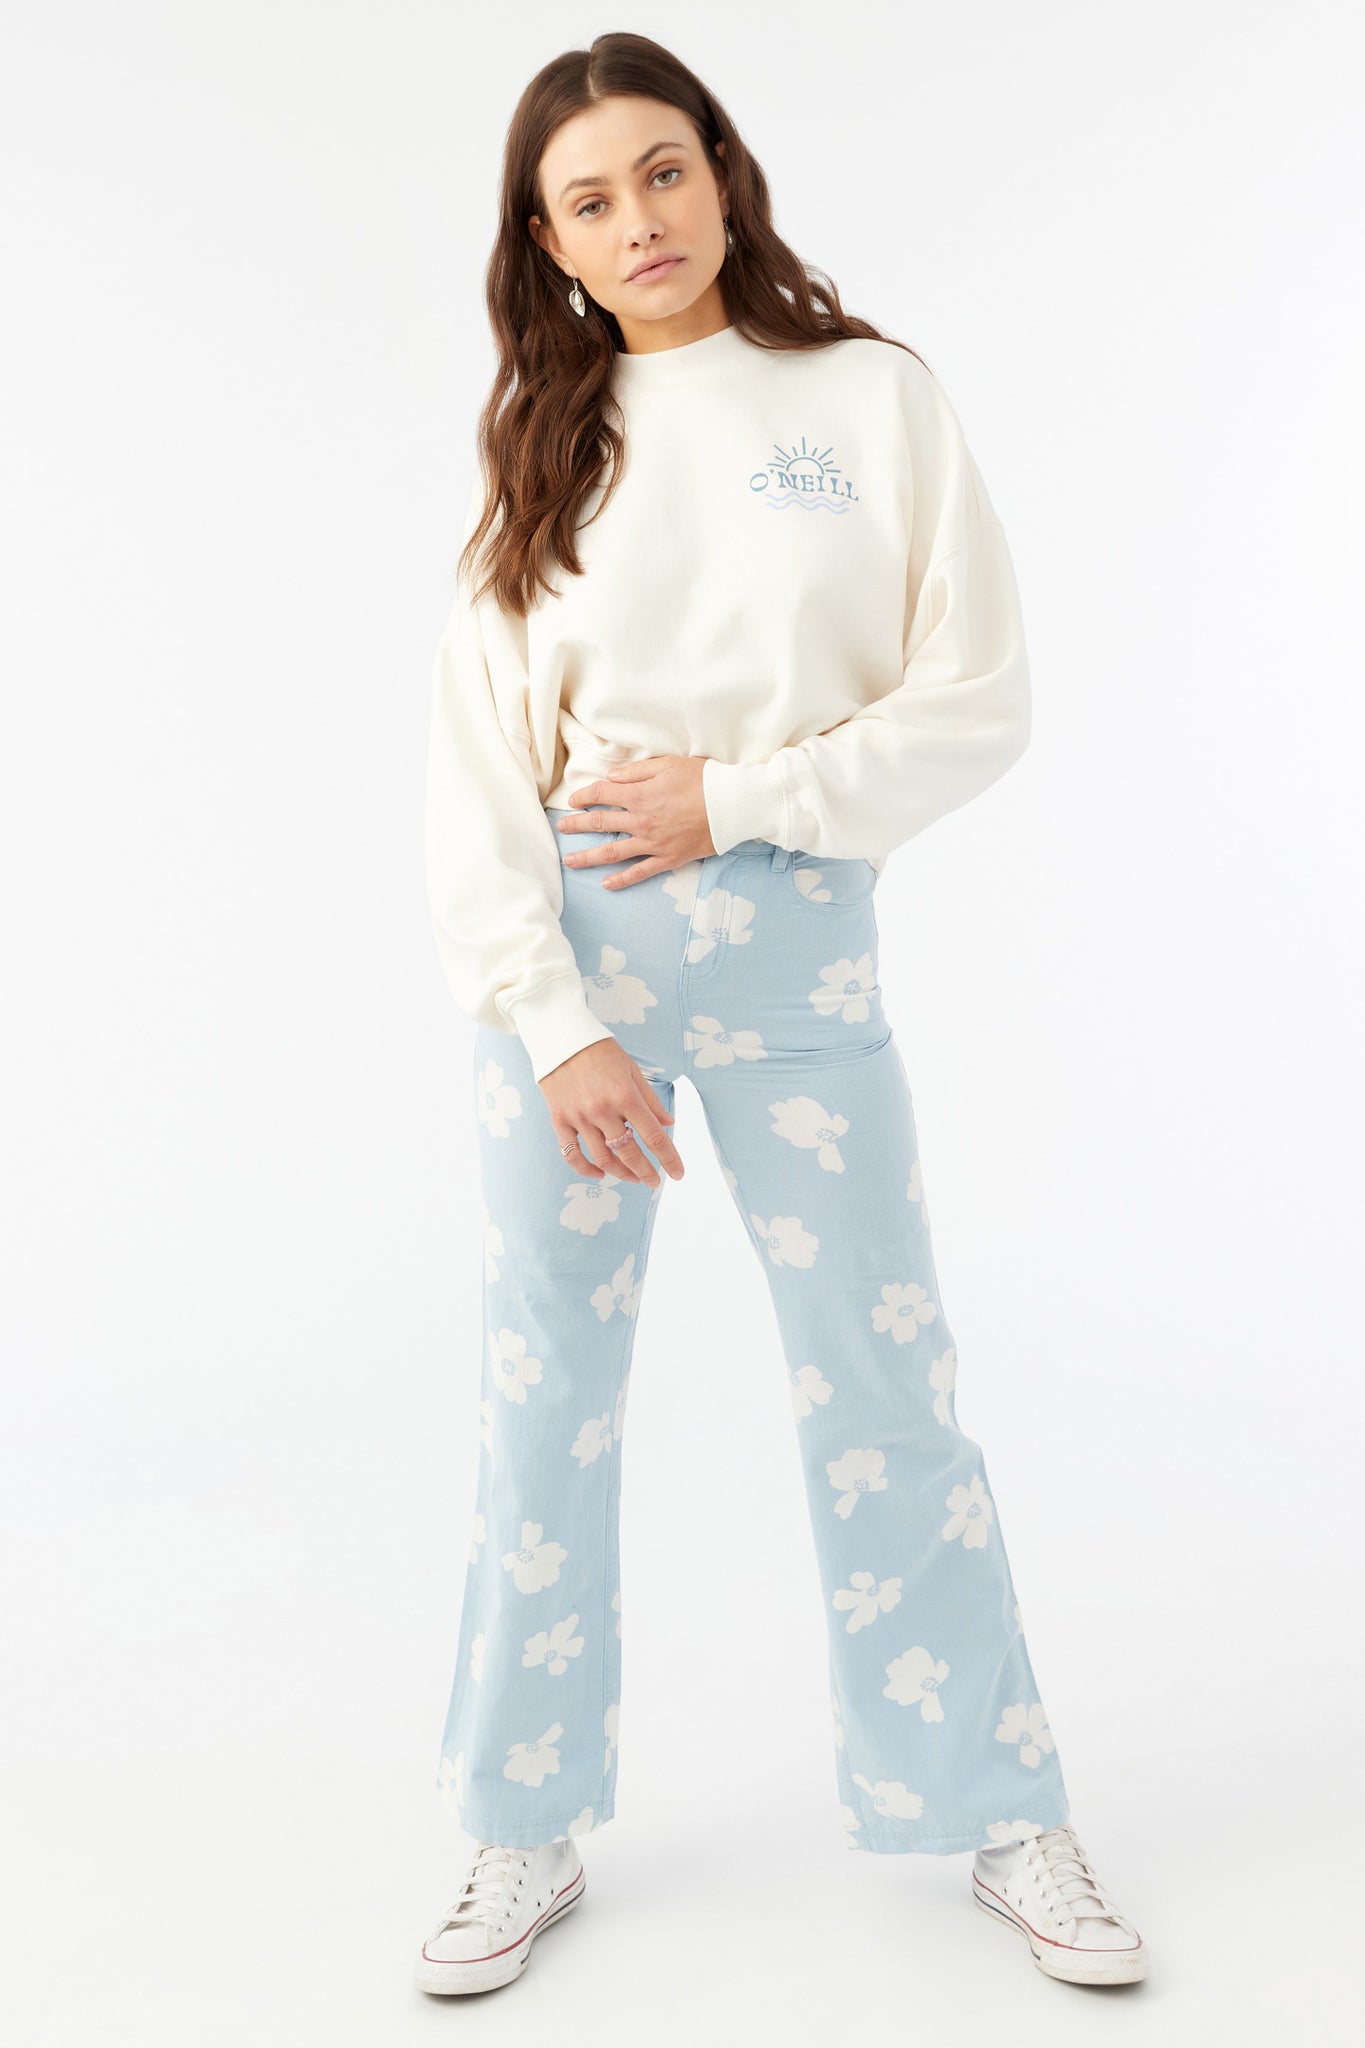 MOMENT CROP PULLOVER